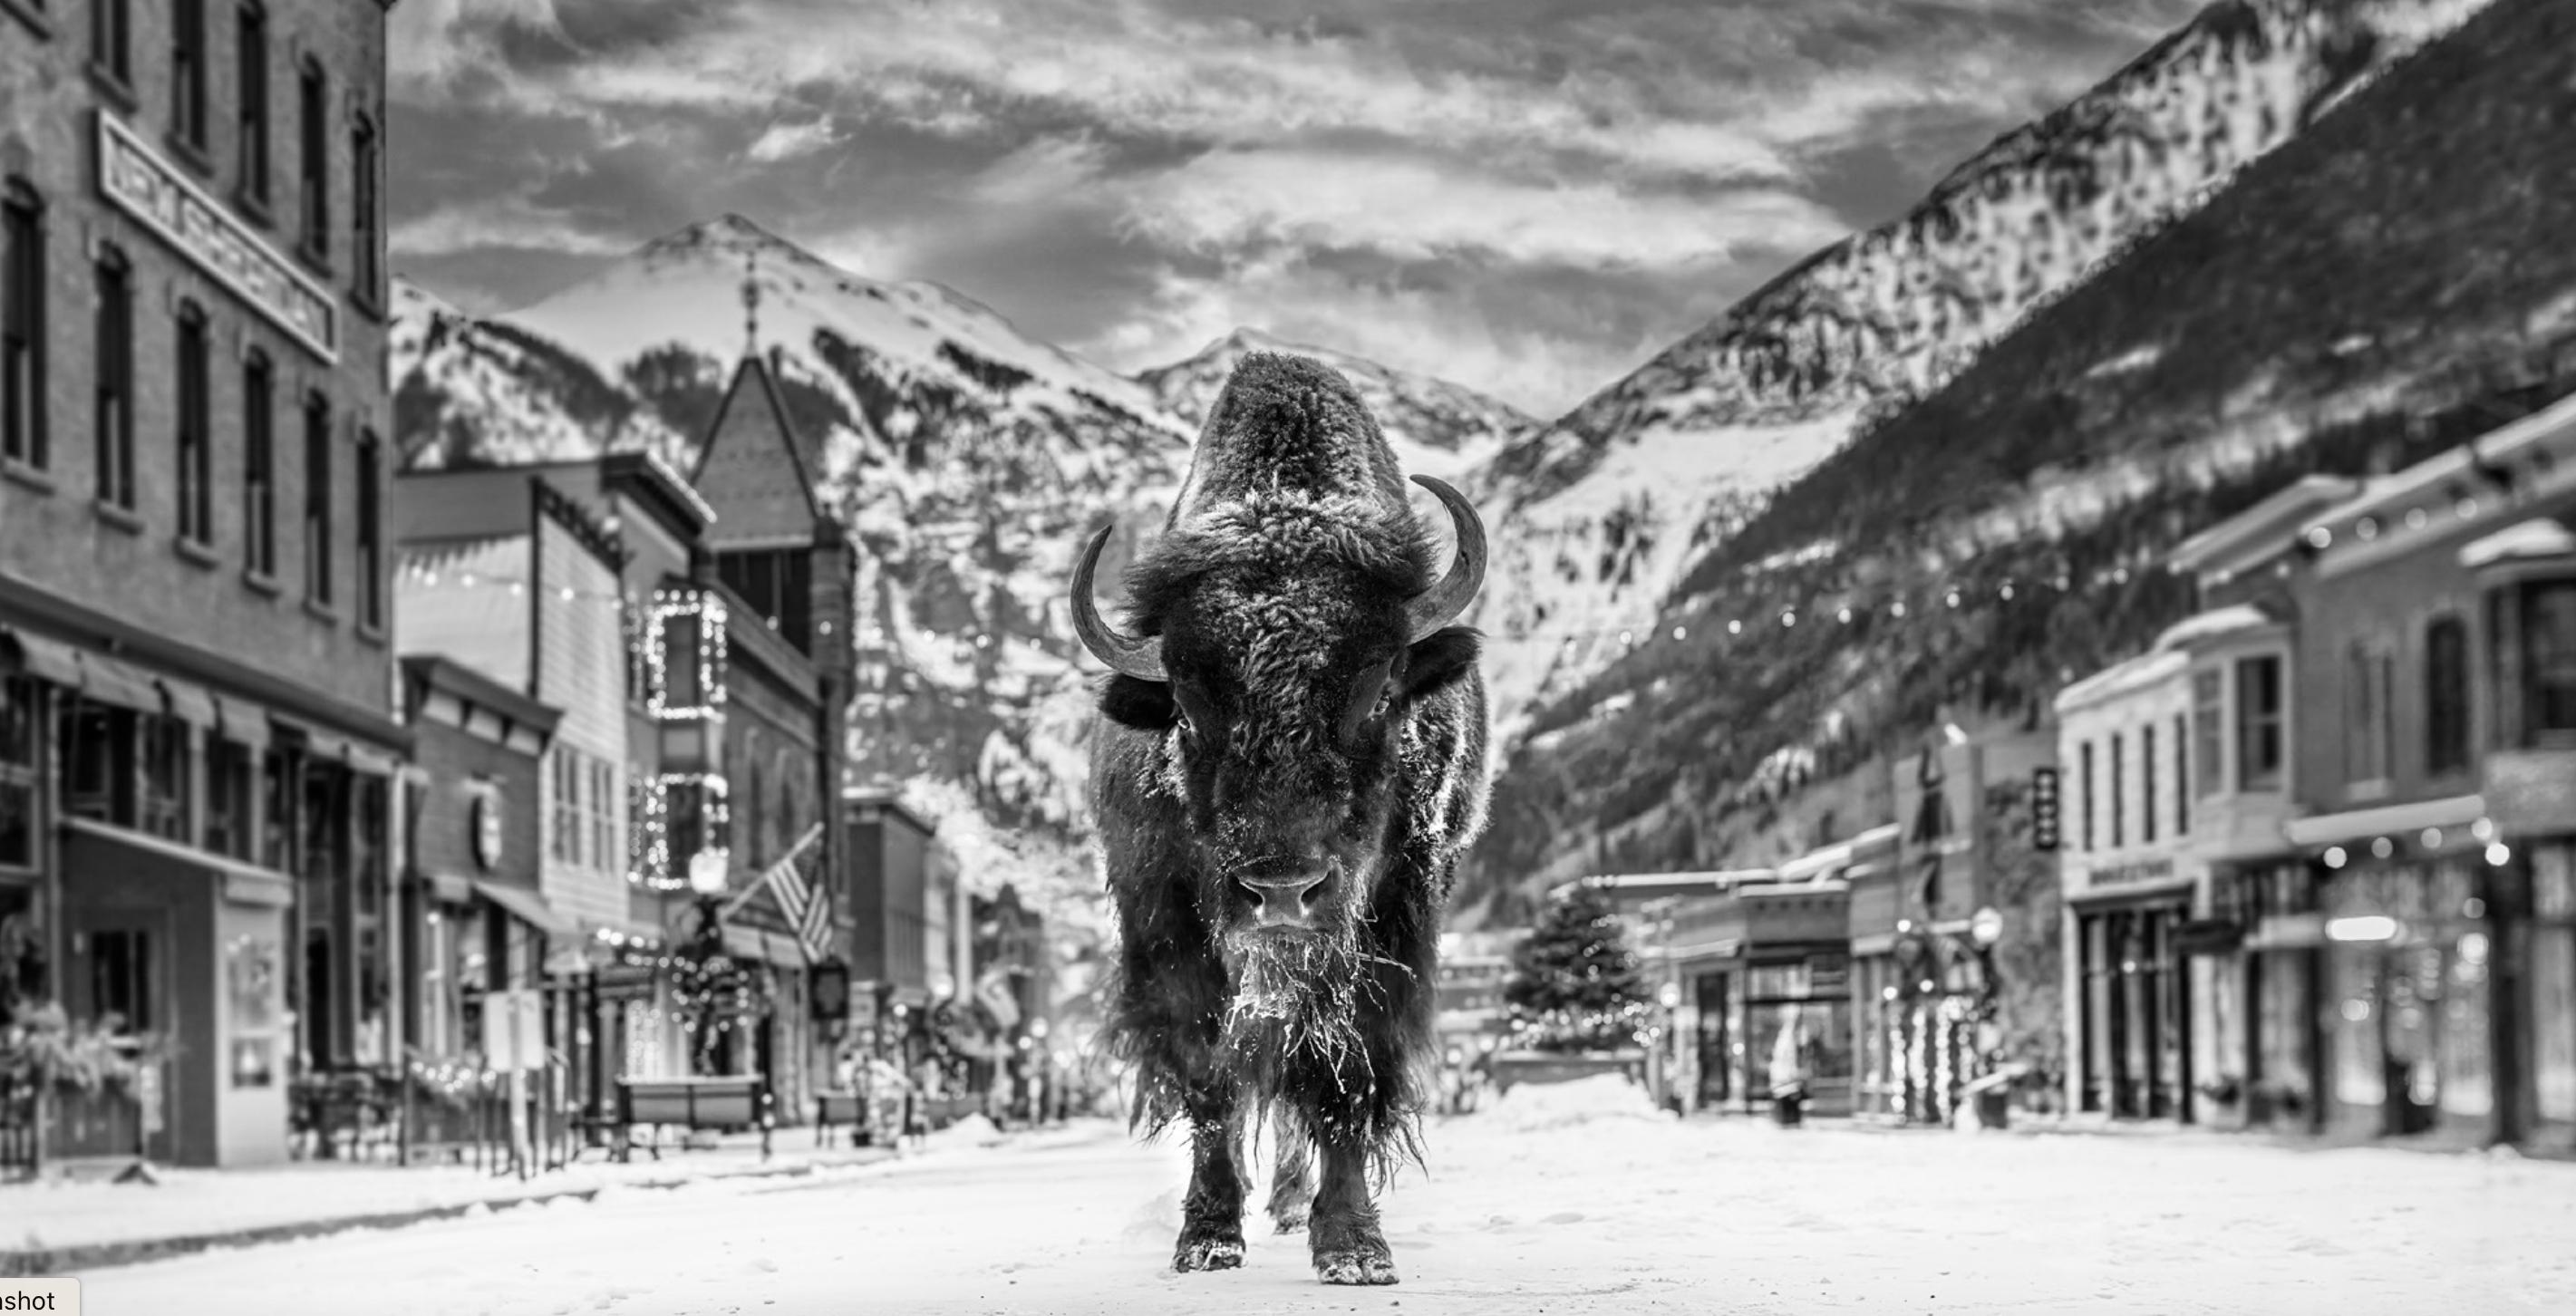 David Yarrow Black and White Photograph - The Bison on Main